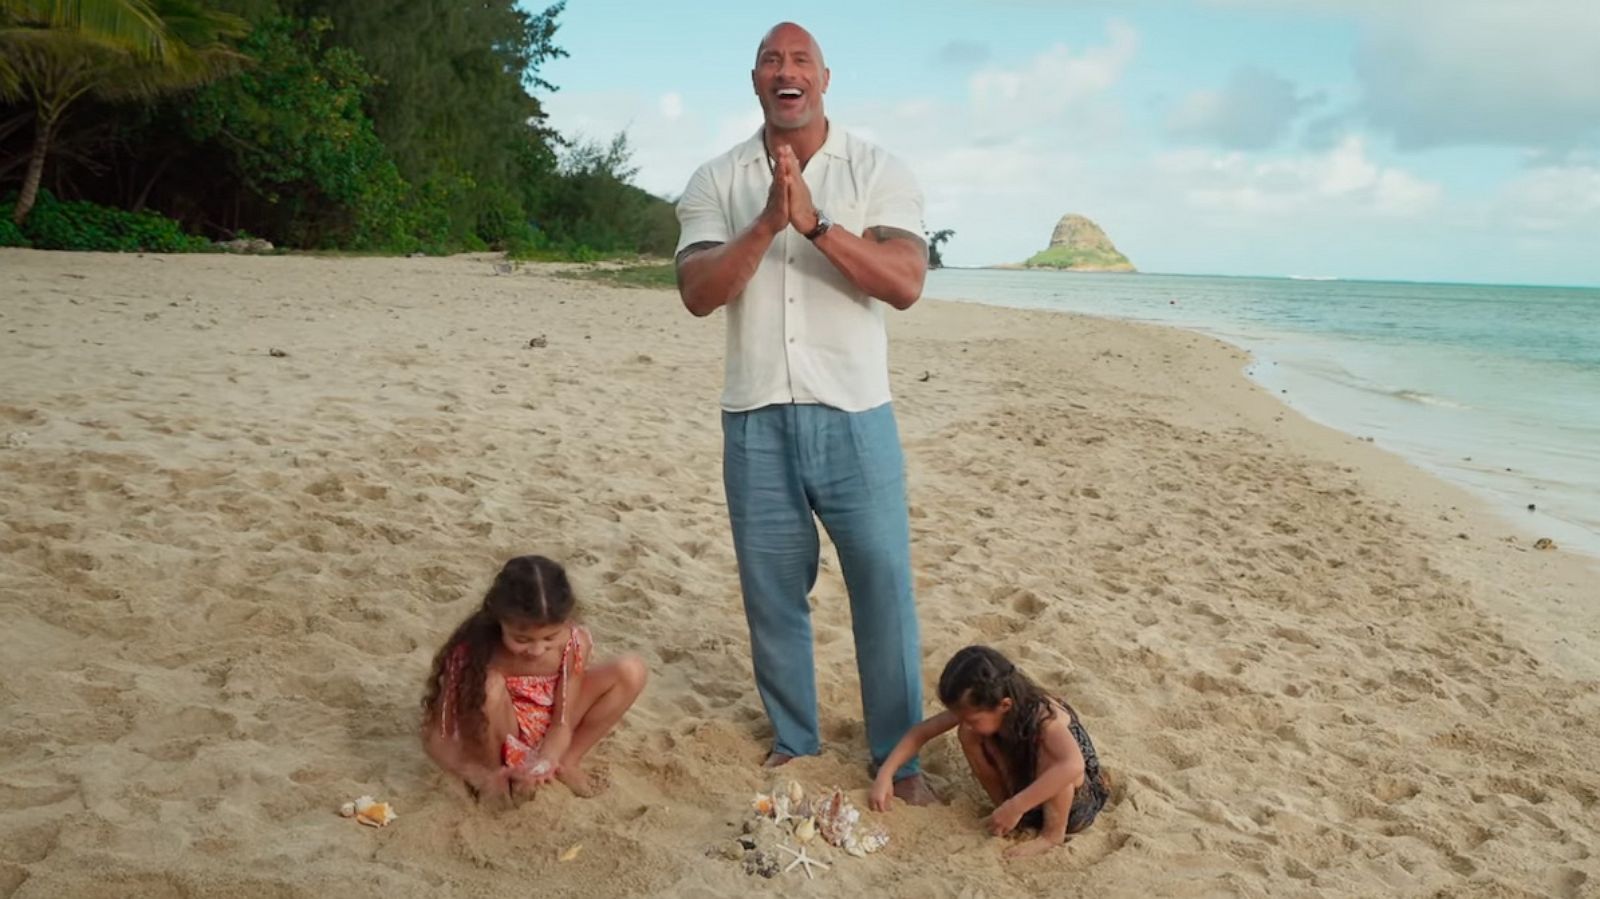 The Rock and Disney Announce Live-Action Moana Movie Is on the Way